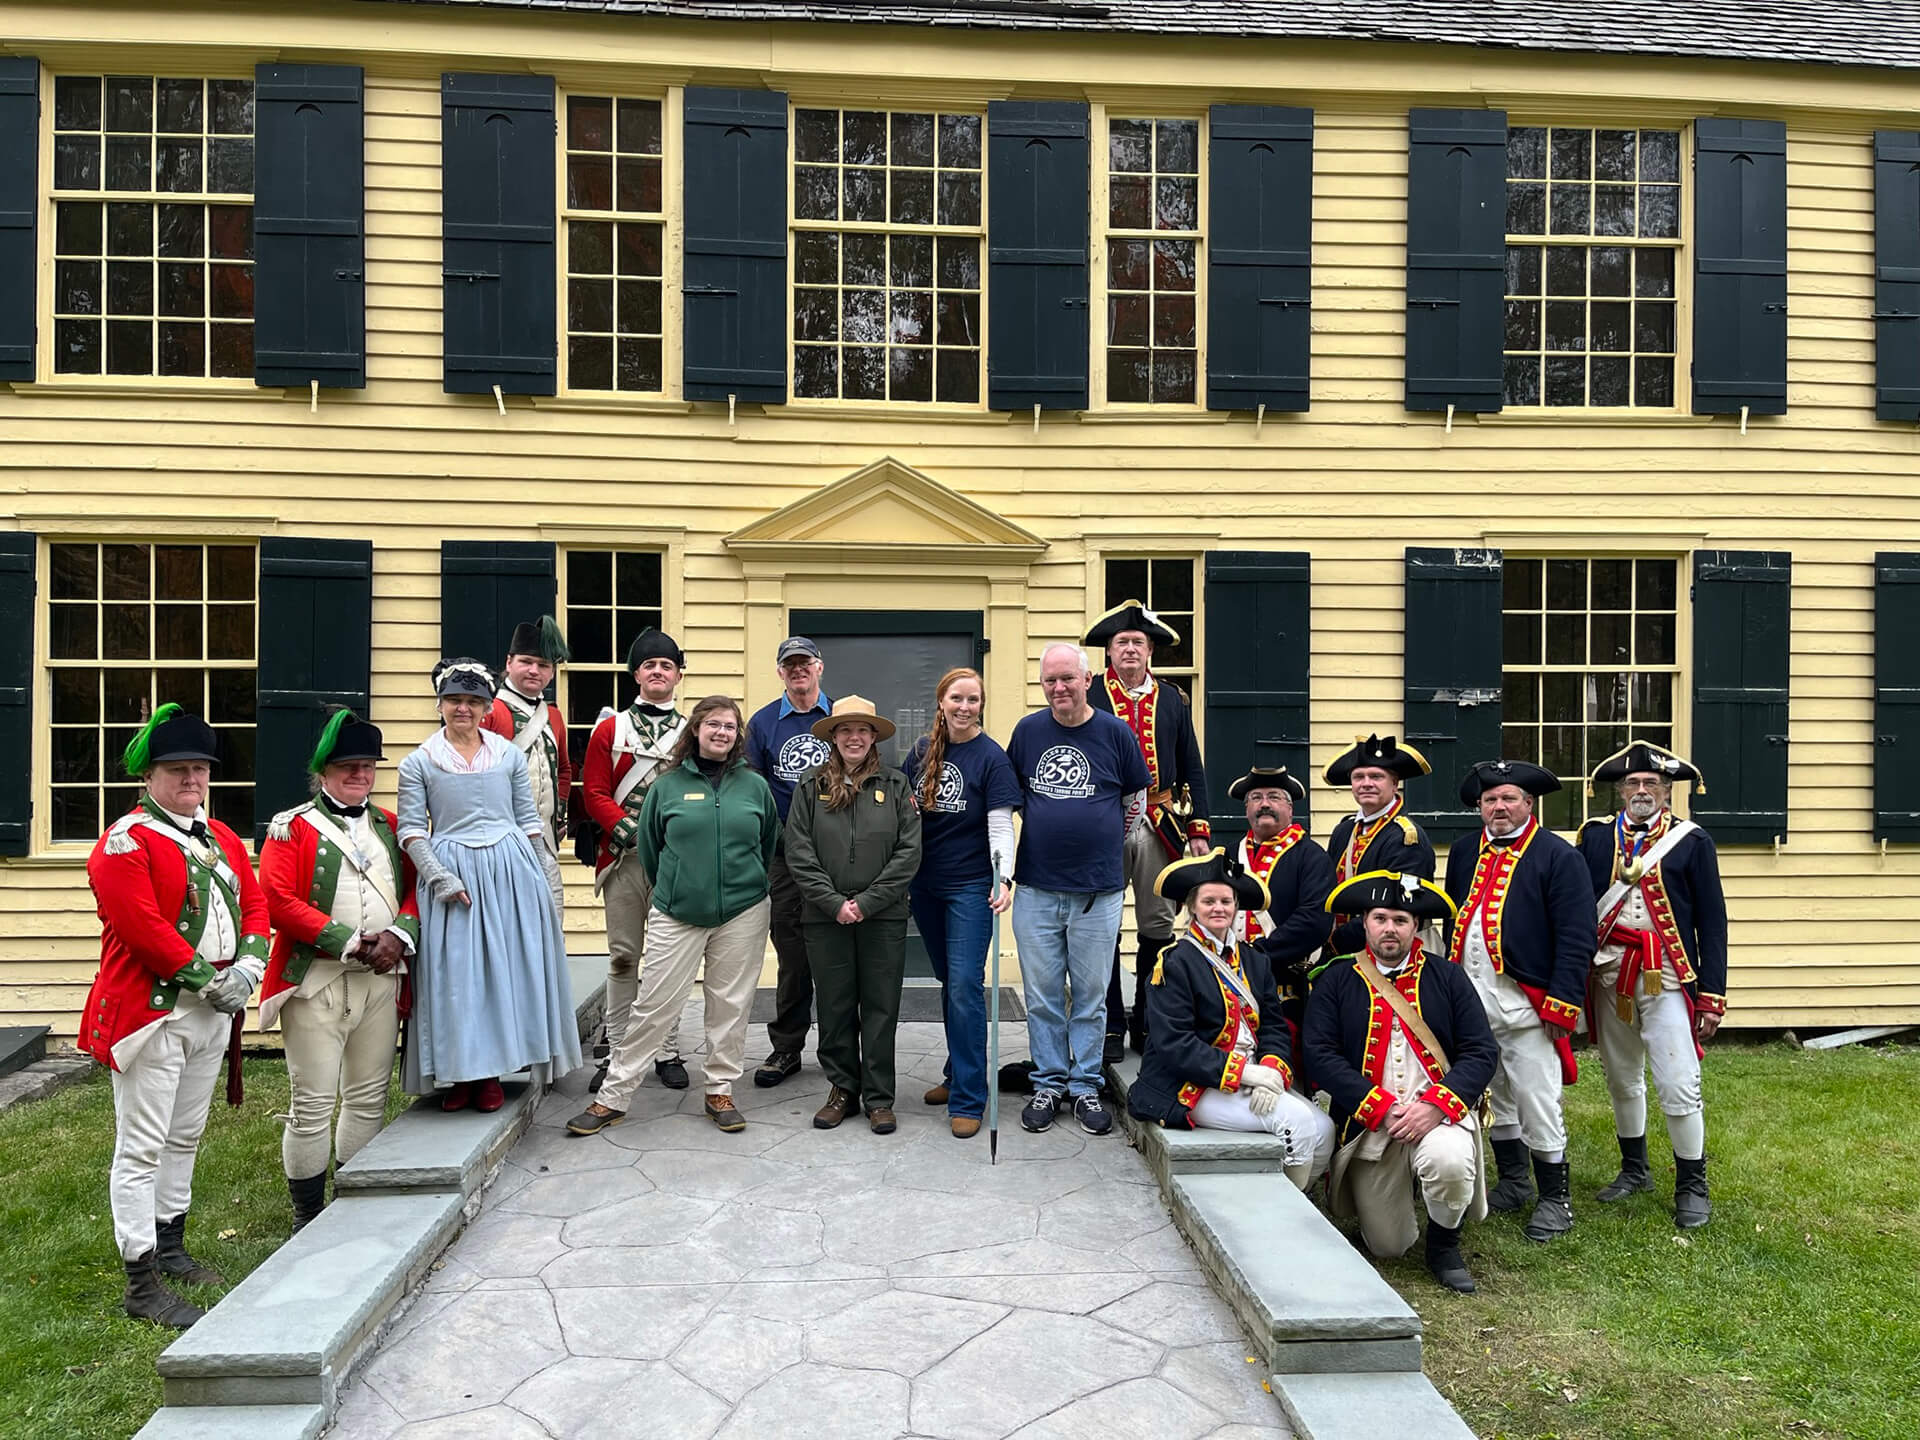 People from the National Park Service, Saratoga 250, and reenactors in front of The Schuyler House